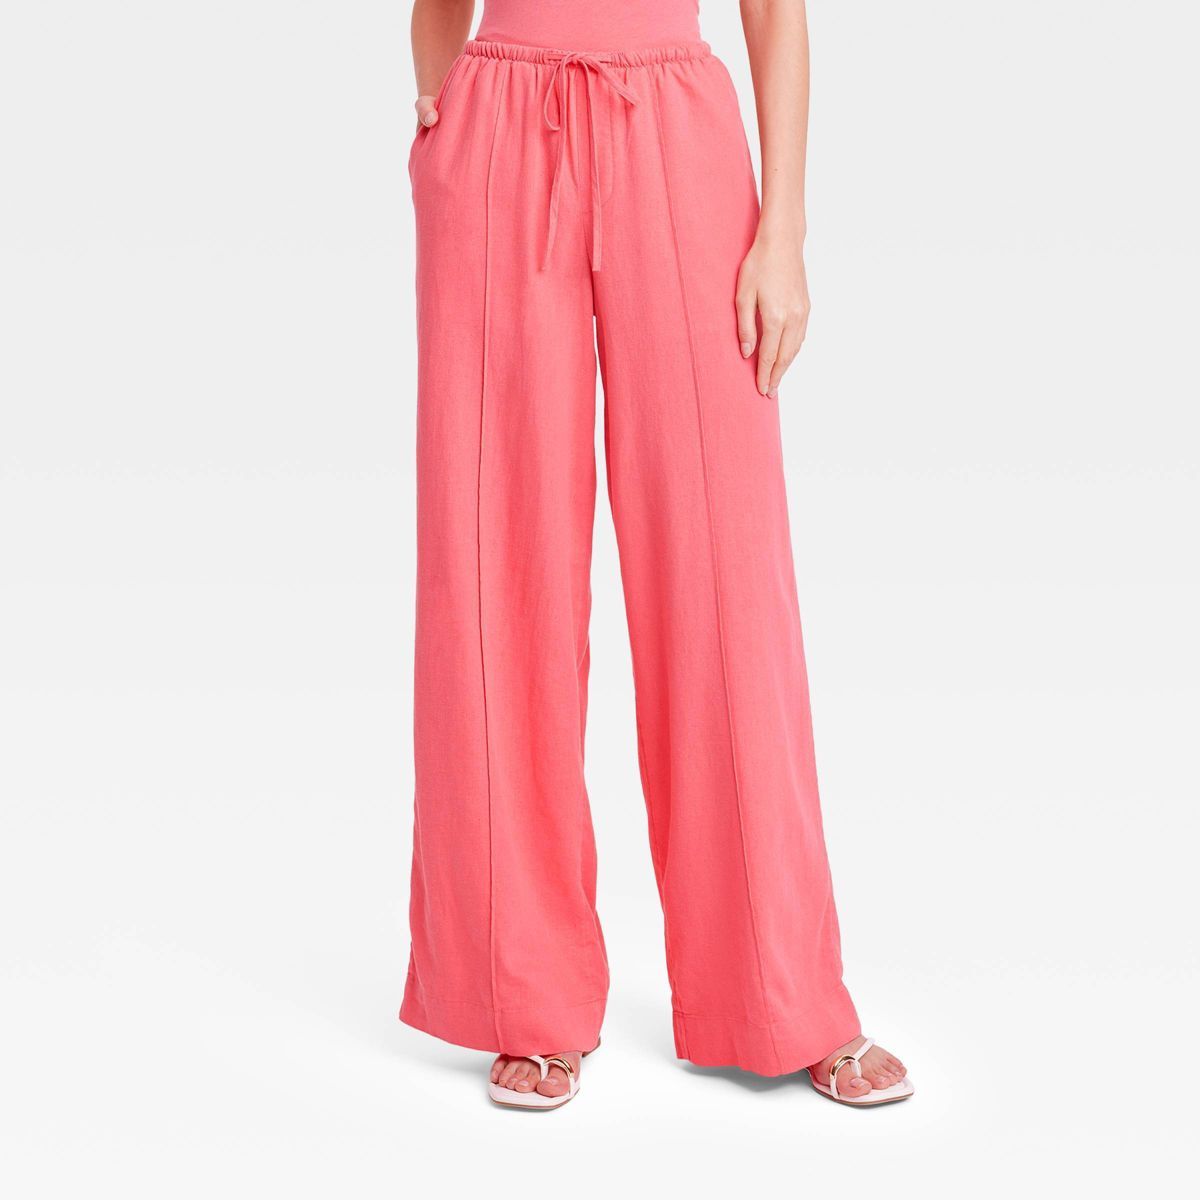 Women's High-Rise Wide Leg Linen Pull-On Pants - A New Day™ Pink M | Target